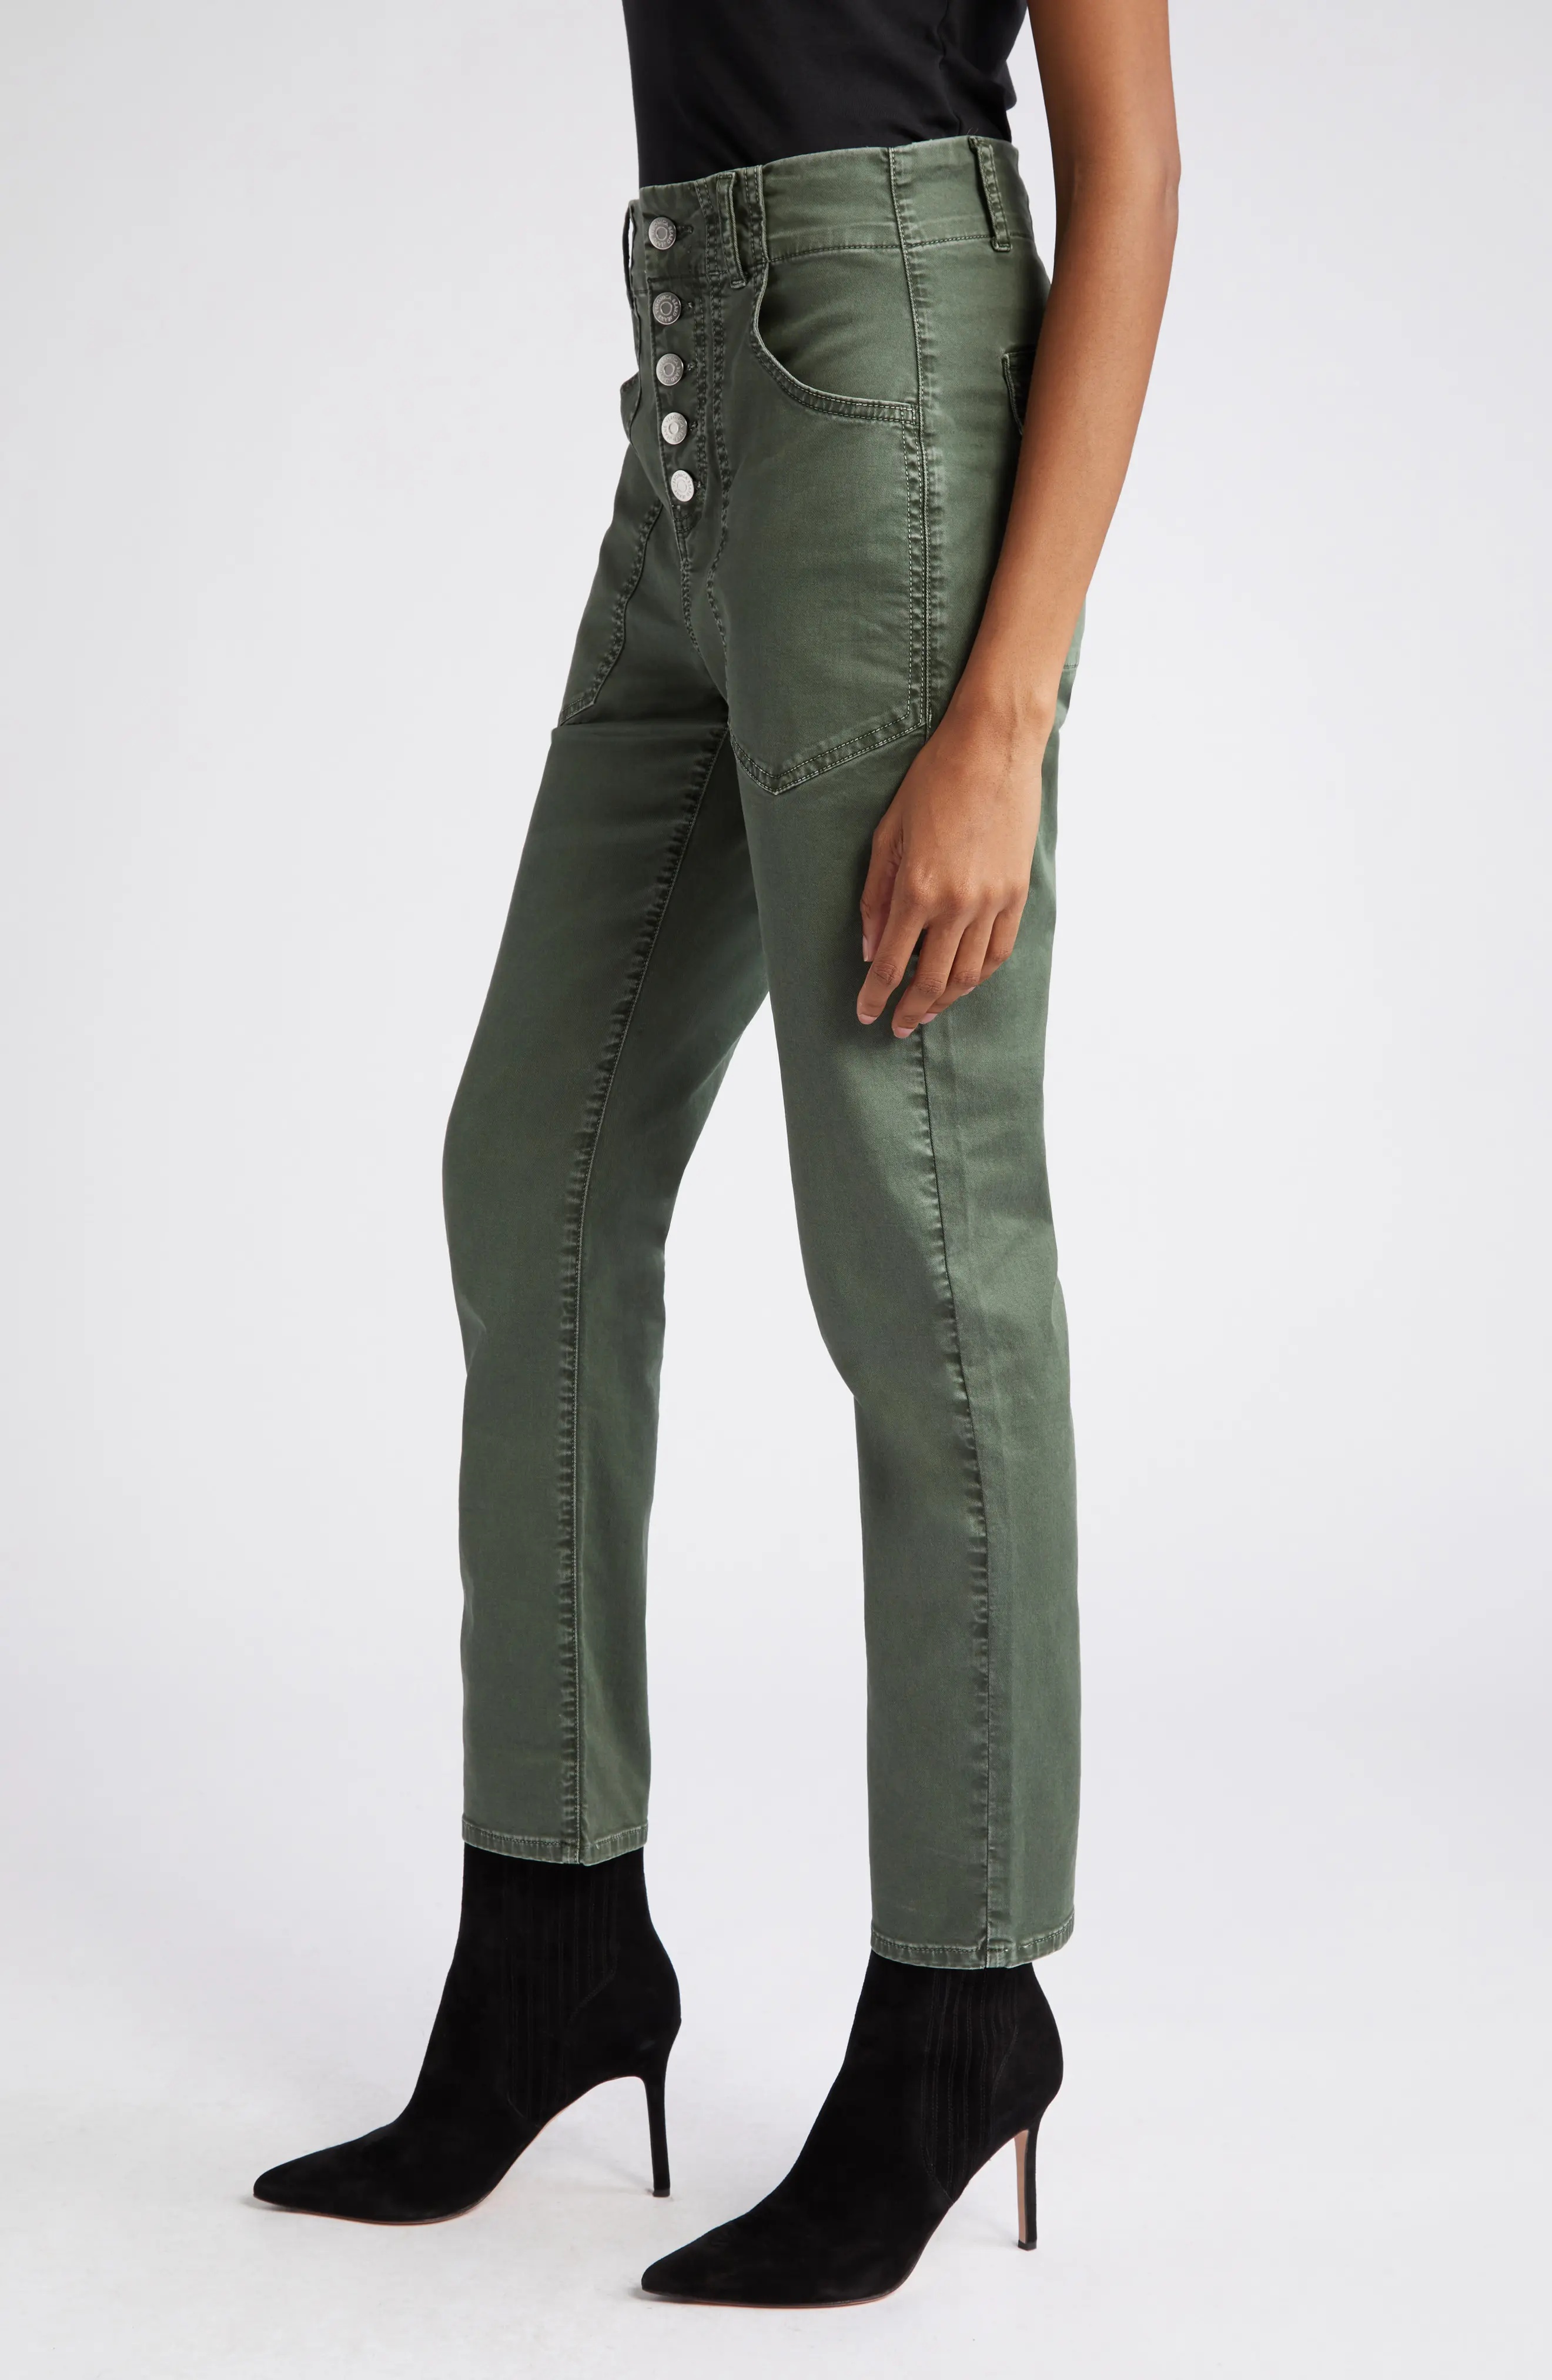 Arya Button Fly Stretch Cotton Pants - 4